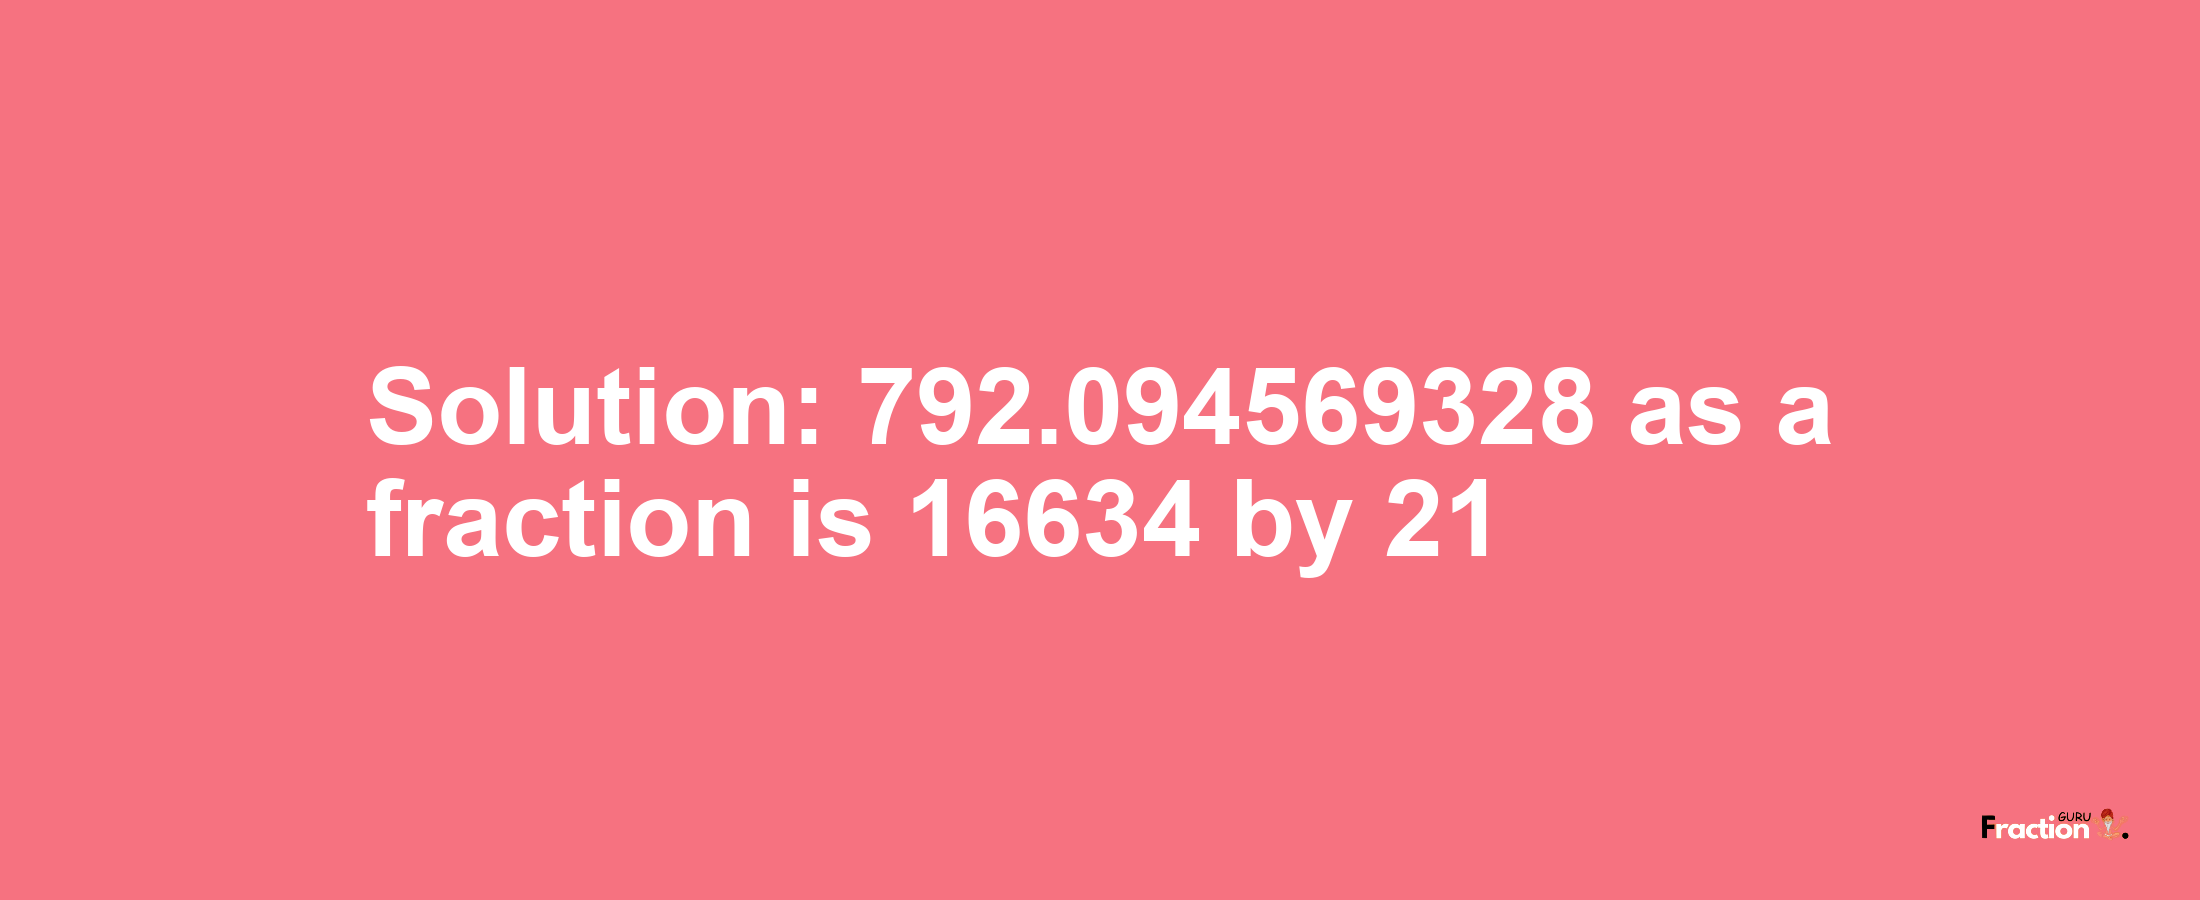 Solution:792.094569328 as a fraction is 16634/21